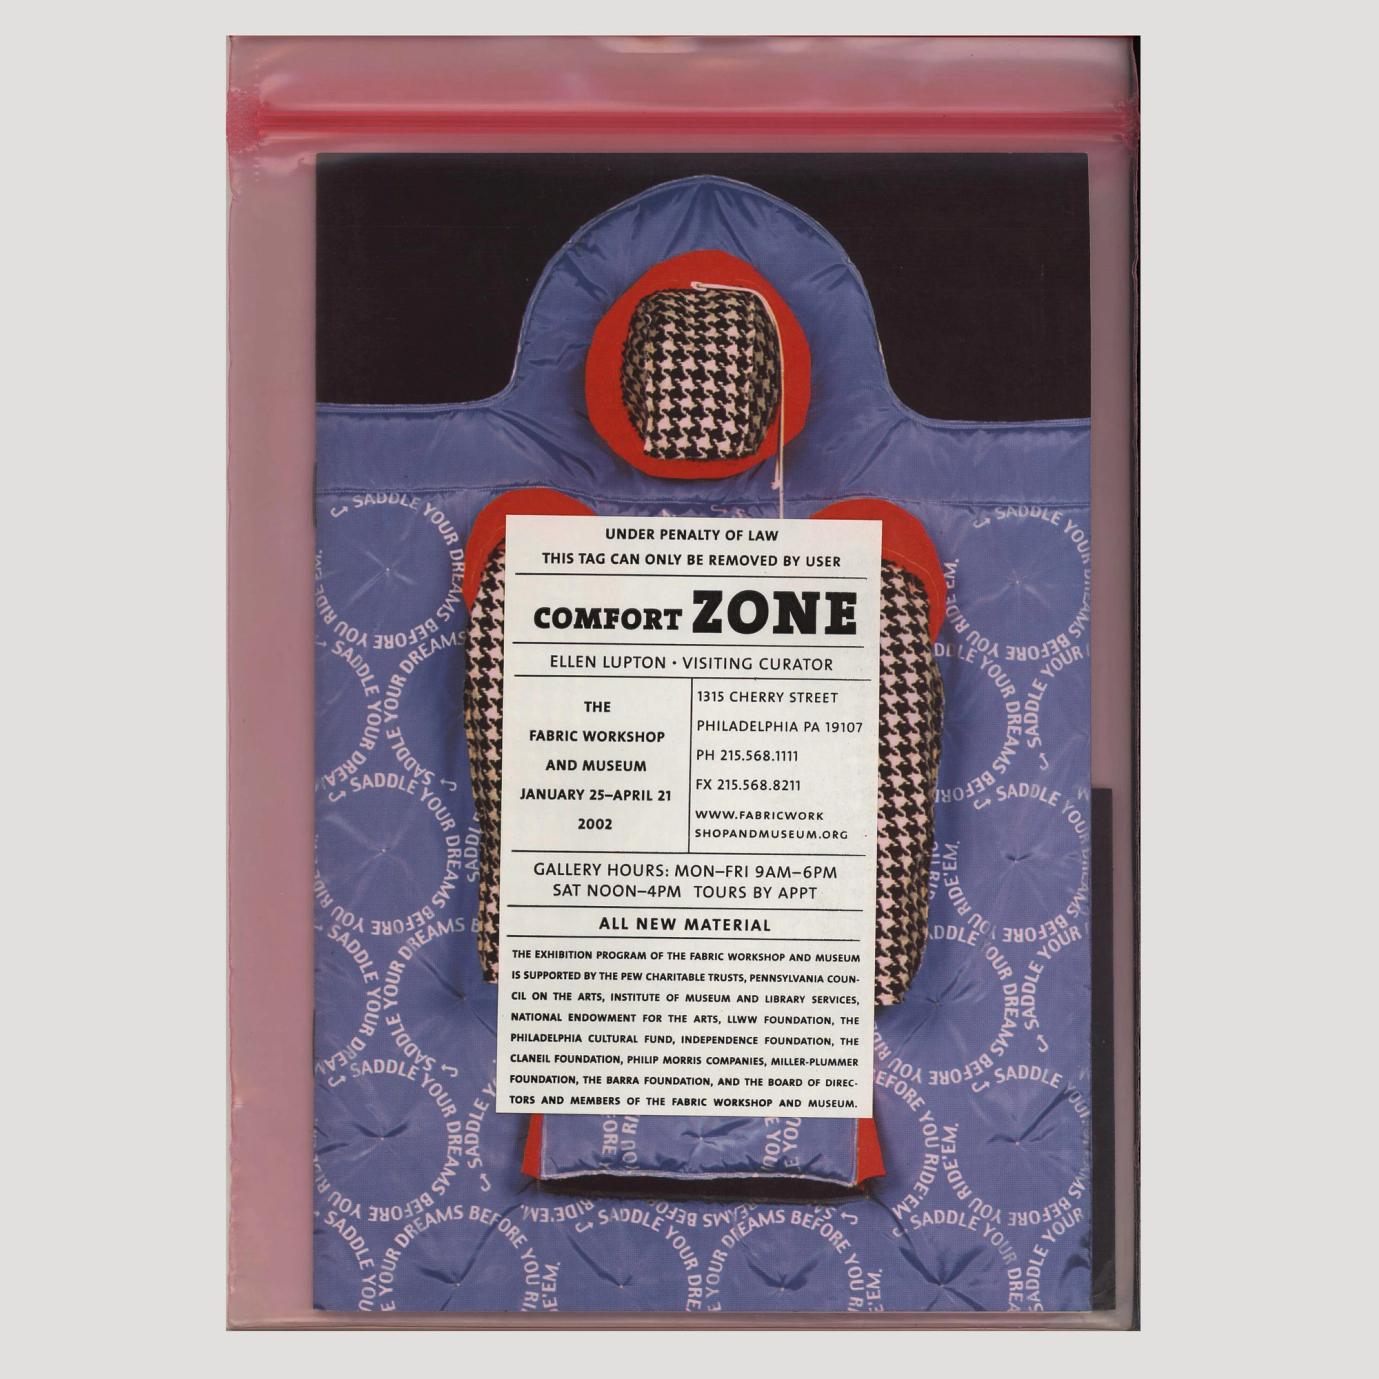 This is an image of a book concealed in a pink, transparent zip-loc plastic bag. On the book cover is a photo of an artwork. The artwork is a wearable sculpture, has a hood and two long sleeves, all made of houndstooth patterned fabric. Where the hood and sleeves connect to the body, there is a thick red fabric acting as a border between the hood, the sleeves, and the body. The body of the sculpture is a rectangular shape, is light blue, and has a pattern of circles, all the same size. The circles are outlined with white text and read: "Saddle your dreams before you ride'em." There is a slit in the fabric at about knee-length for legs to emerge from the jacket. On the plastic cover in the center of the book is a sticker that reads: "Under penalty of law this tag can only be removed by user Comfort Zone Ellen Lupton Visiting Curator The Fabric Workshop and Museum January 25–April 21 2022 1315 Cherry Street Philadelphia PA 19107 PH 215.568.1111 FX 215.568.8211 www.fabricworkshopandmuseum.org Gallery hours: Mon–Fri 9am–6pm Sat Noon–4pm Tours by appt All new material The exhibition program of The Fabric Workshop and Museum is supported by The Pew Charitable Trusts, Pennsylvania Council of the Arts, Institute of Museum and Library Services, National Endowment for the Arts, LLWW Foundation, The Philadelphia Cultural Fund, Independence Foundation, The Claneil Foundation, philip Morris Companies, Miller-Plummer Foundation, The Barra Foundation, and The Board of Directors and Members of The Fabric Workshop and Museum."